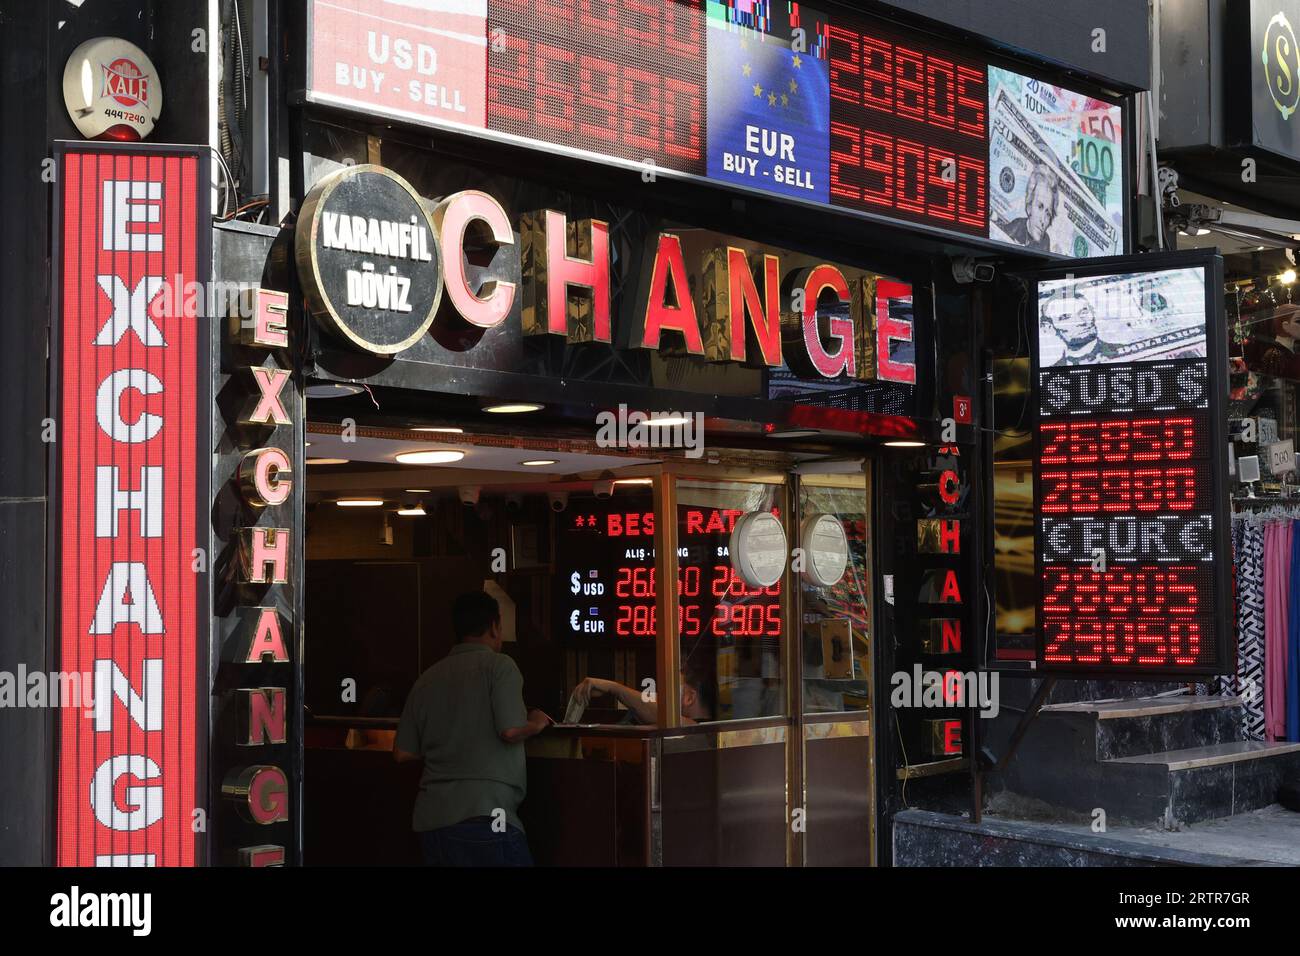 Currency exchange business in Istanbul, Turkey Stock Photo